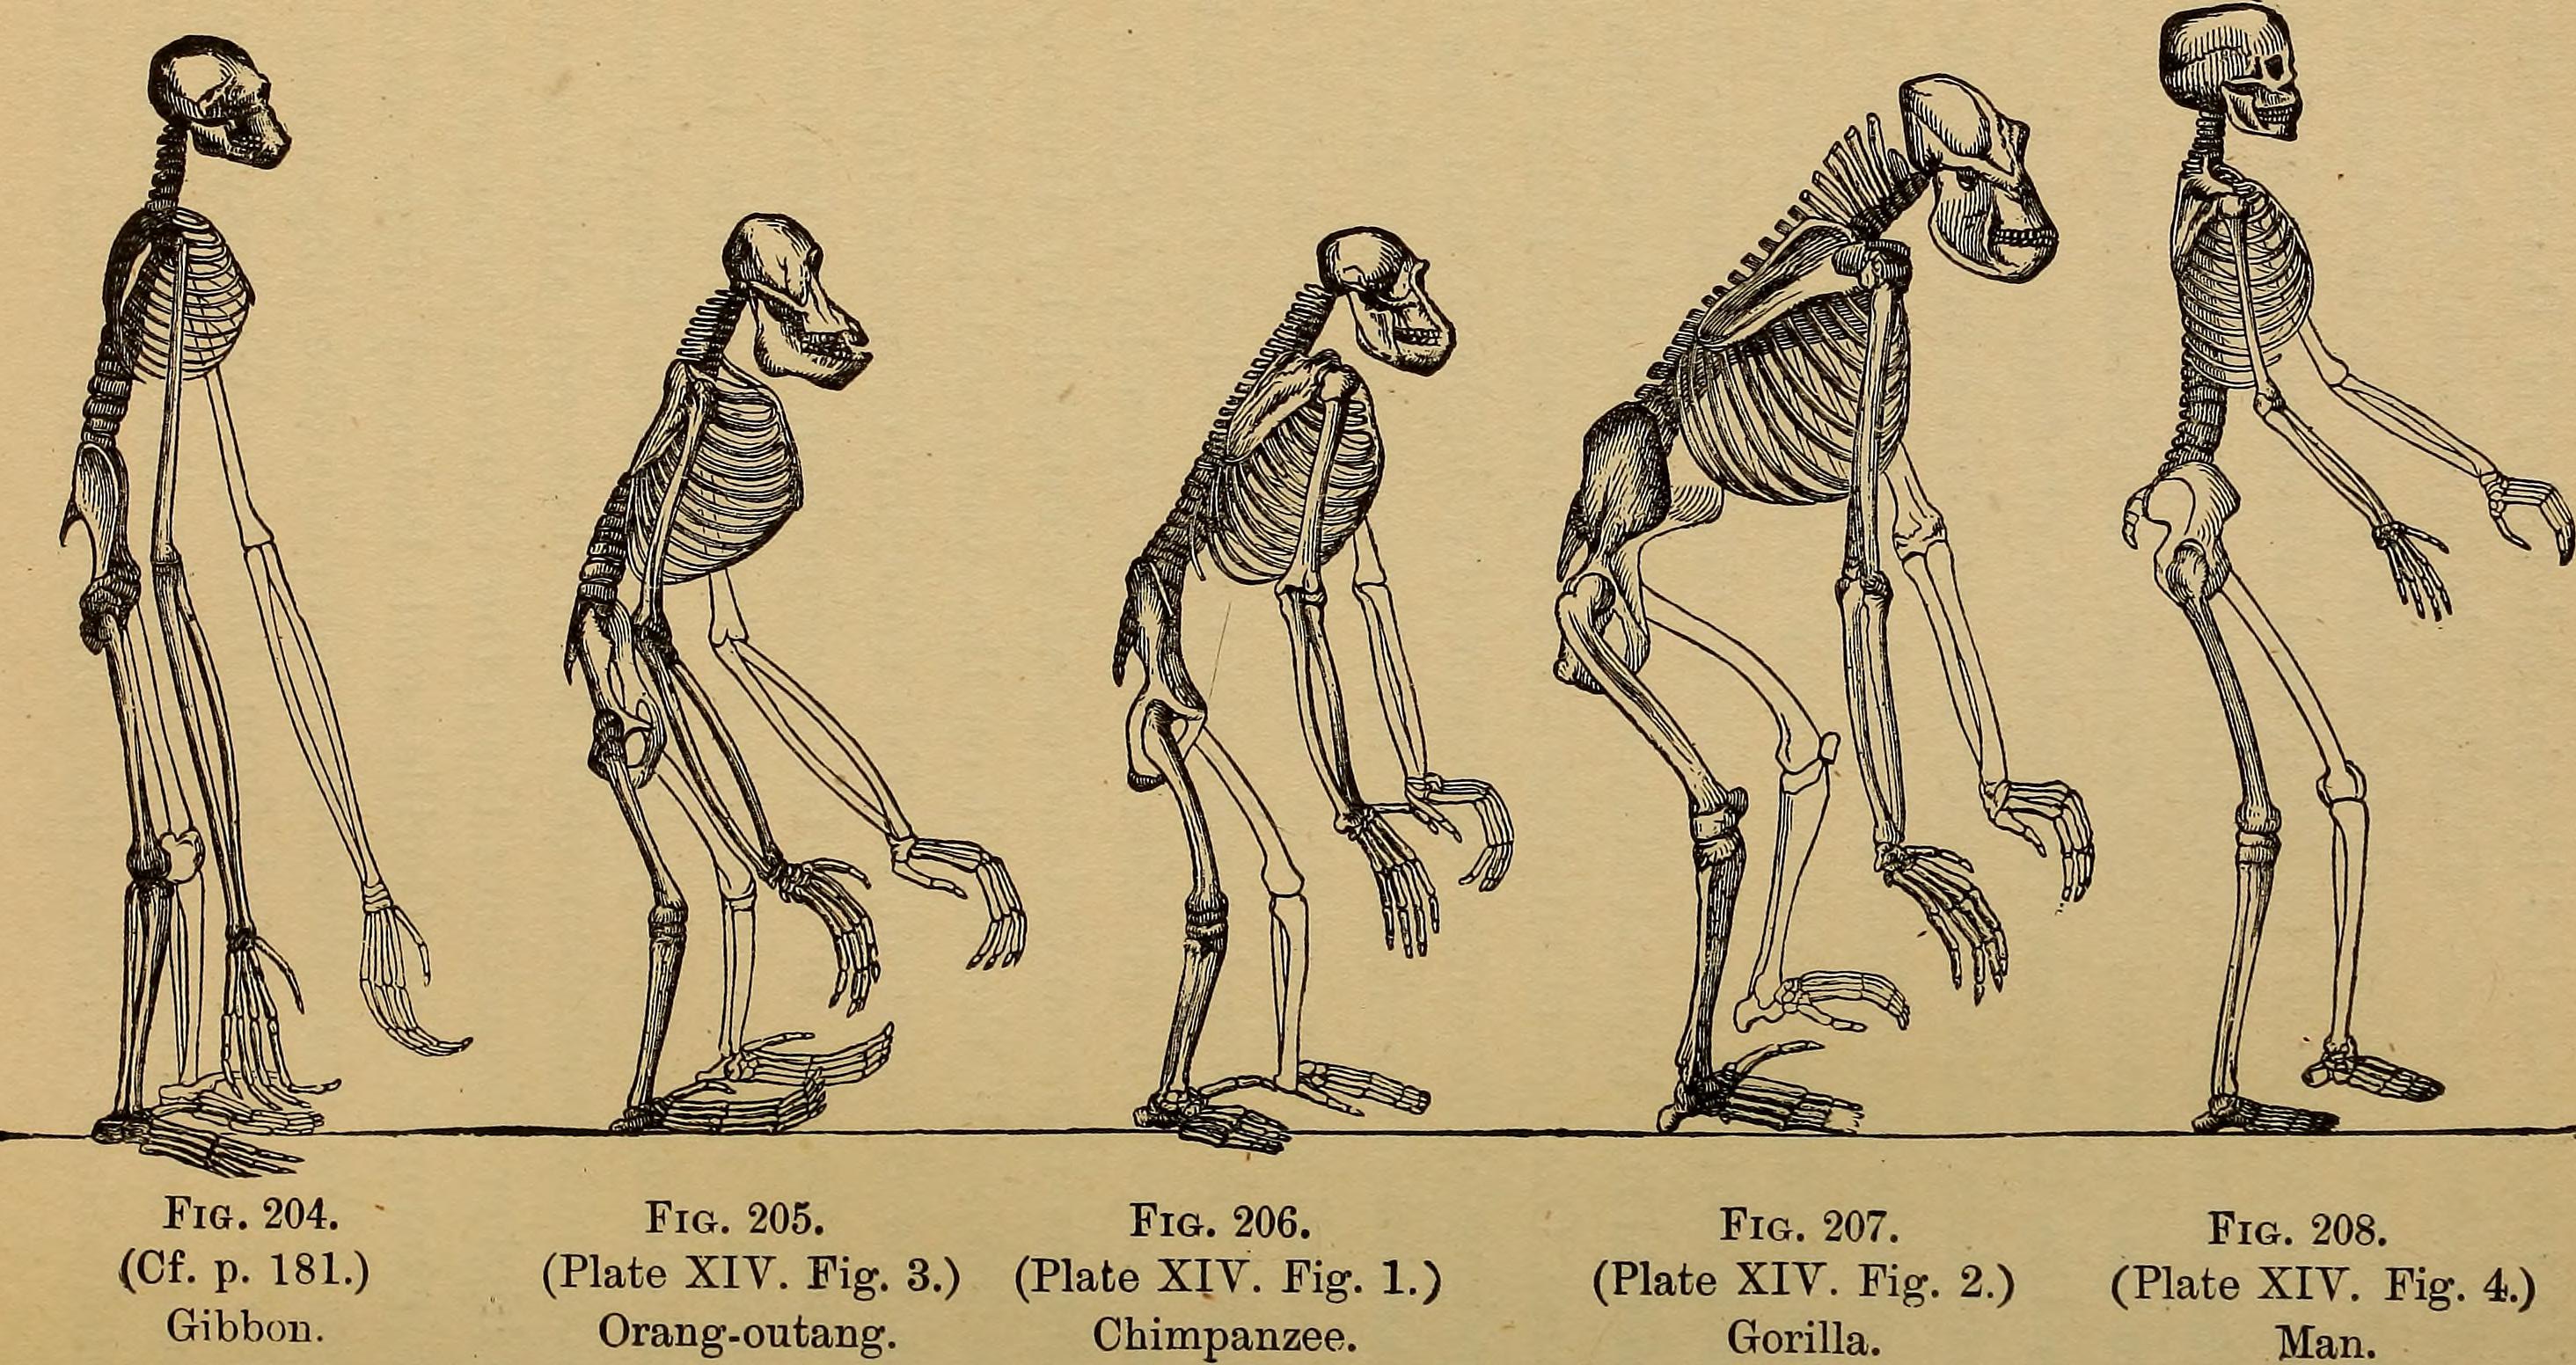 line drawings depicting apes evolving into a human